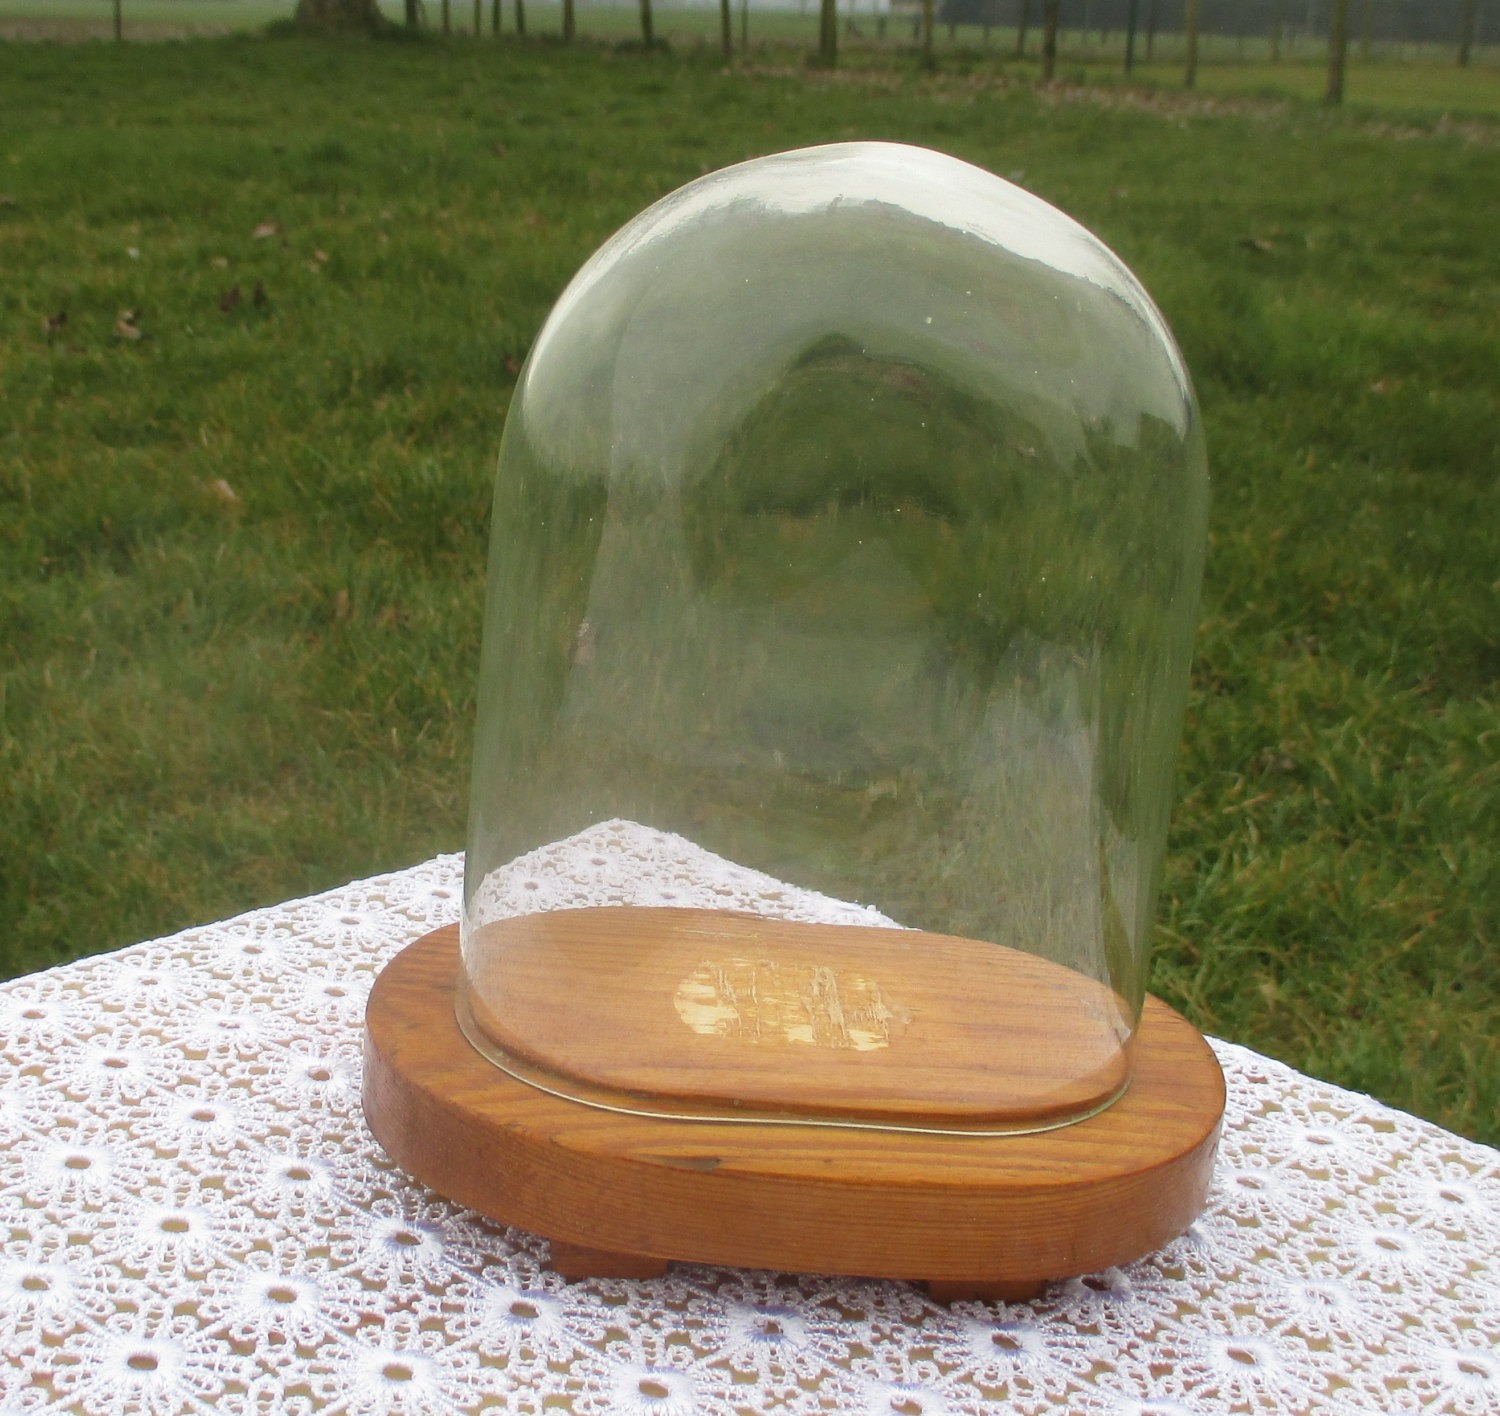 Small Vintage Oval Glass Globe Dome Bell Cloche Display Taxidermy Steampunk 6.3" steampunk buy now online